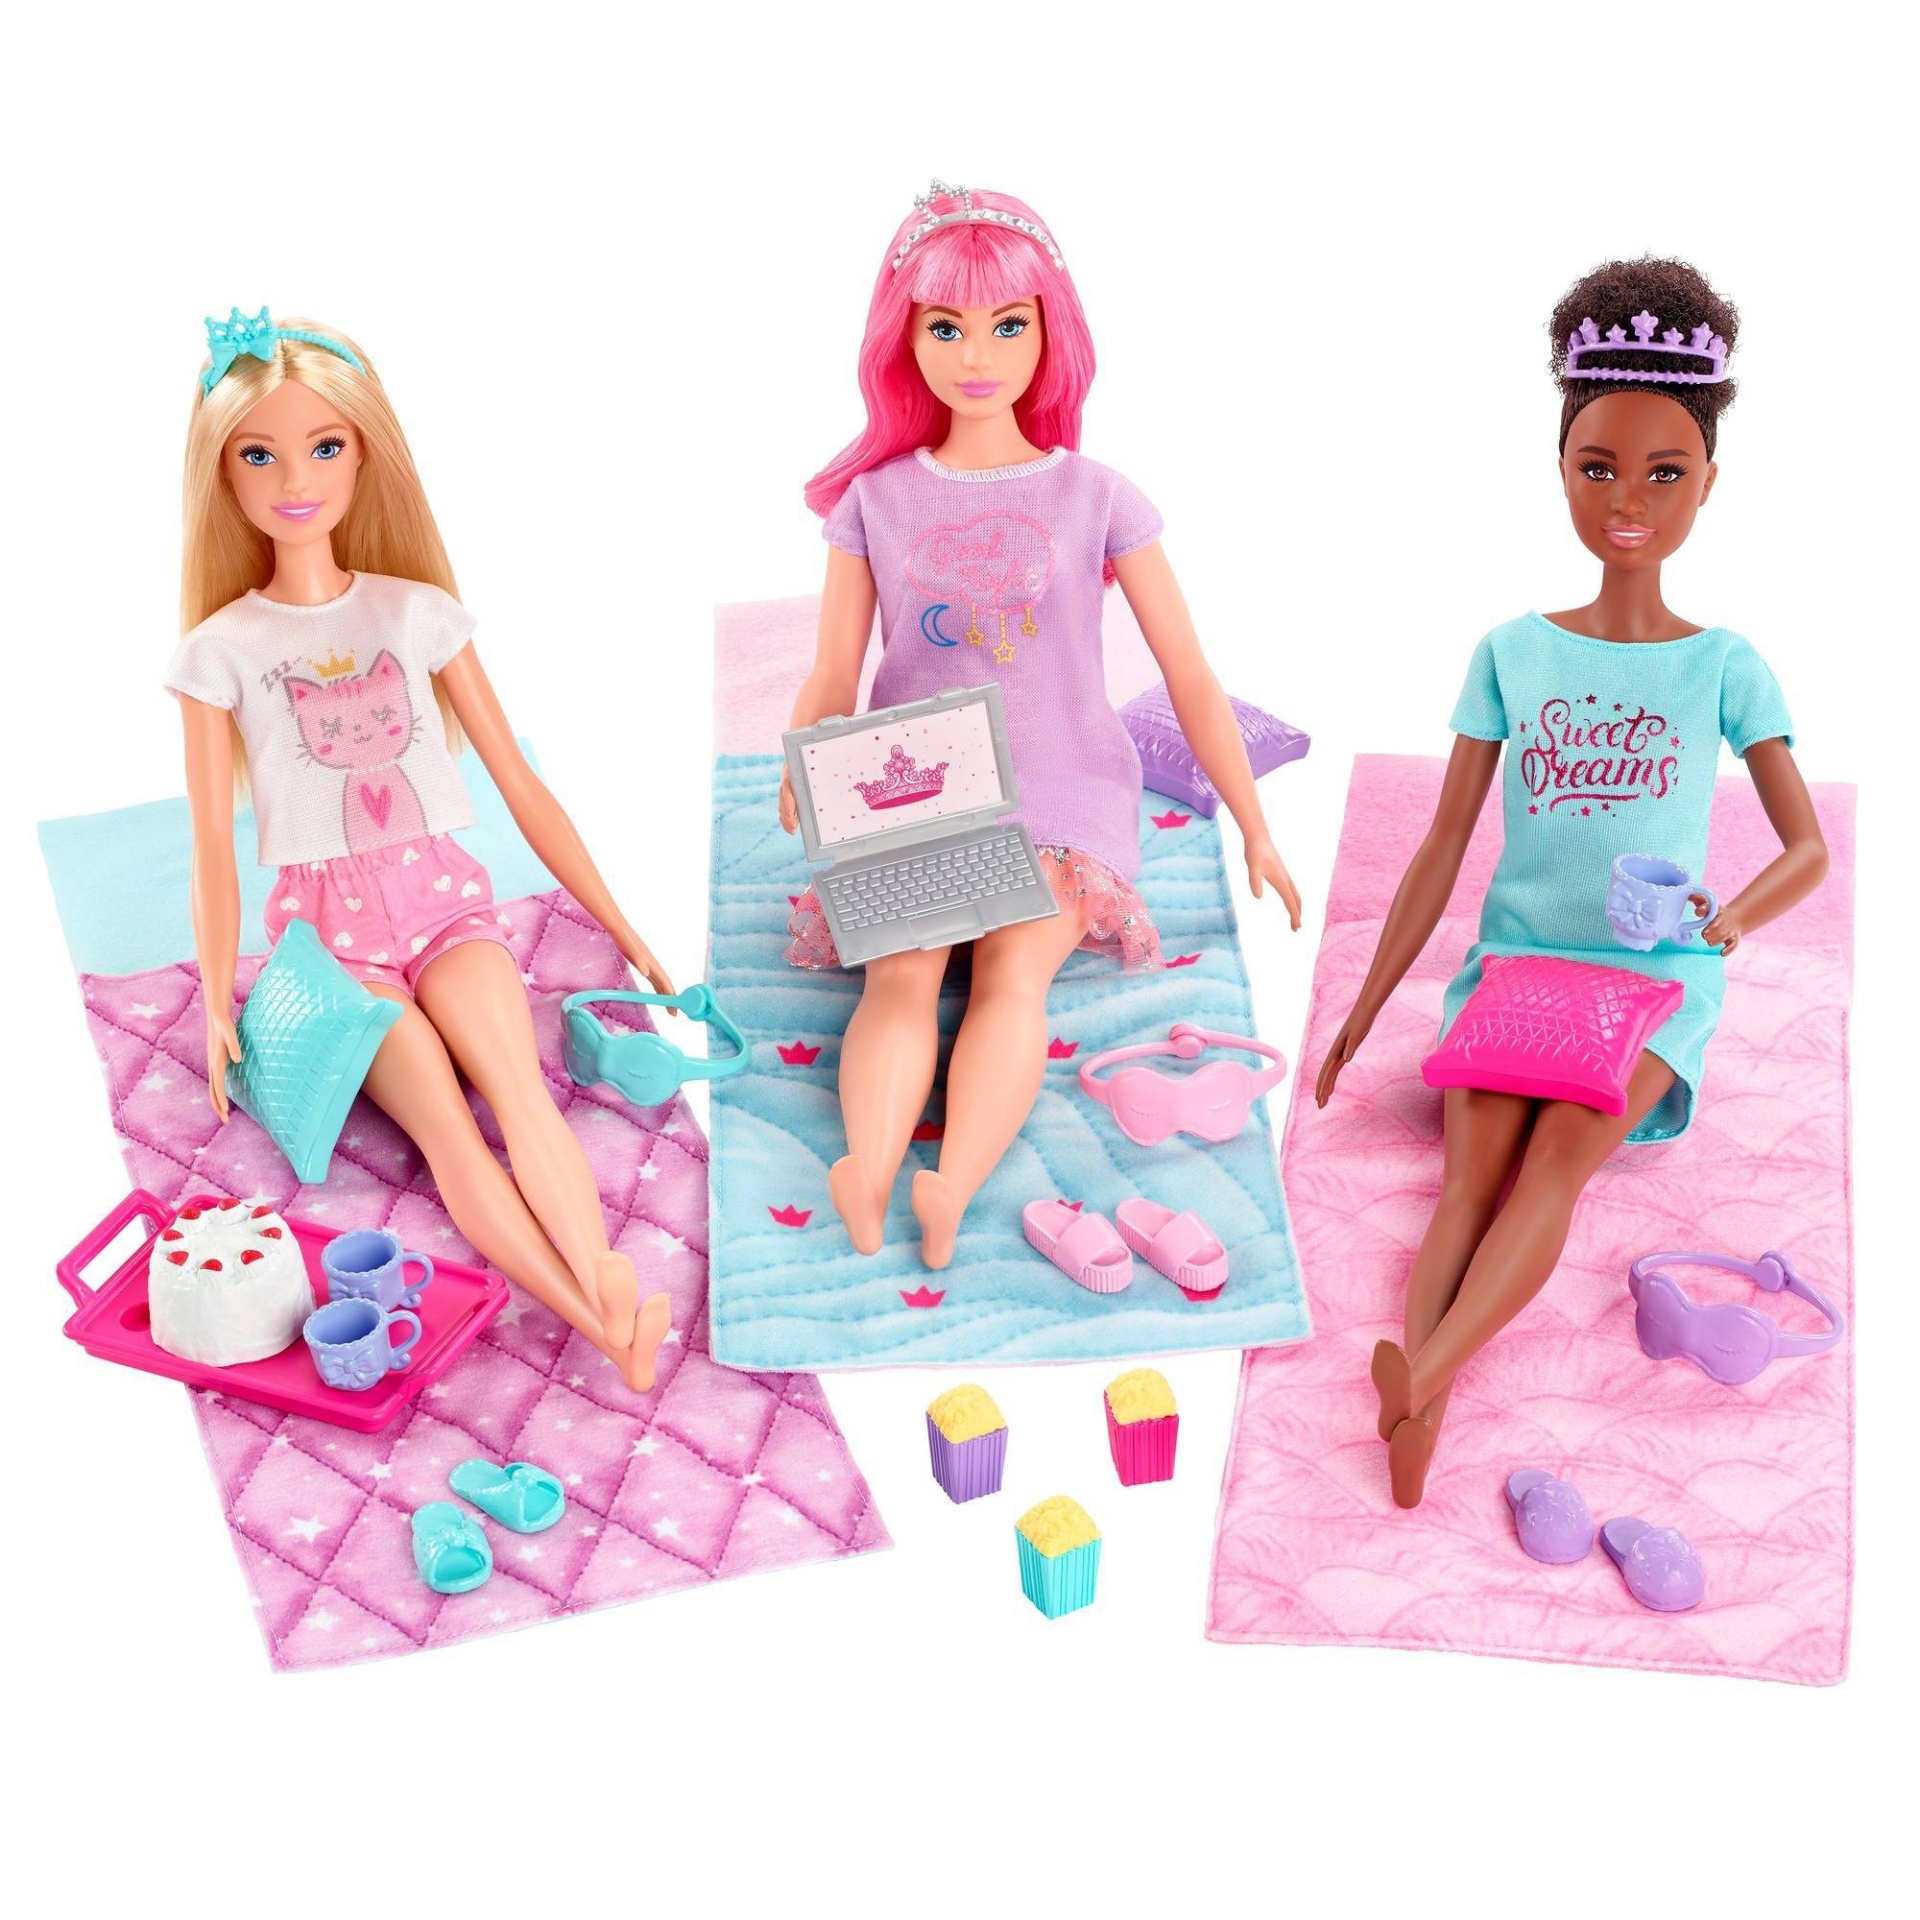 Barbie DreamHouse Adventures Daisy Doll, barbies, dolls childrens, nicky,  kids, toys, dress up, classic